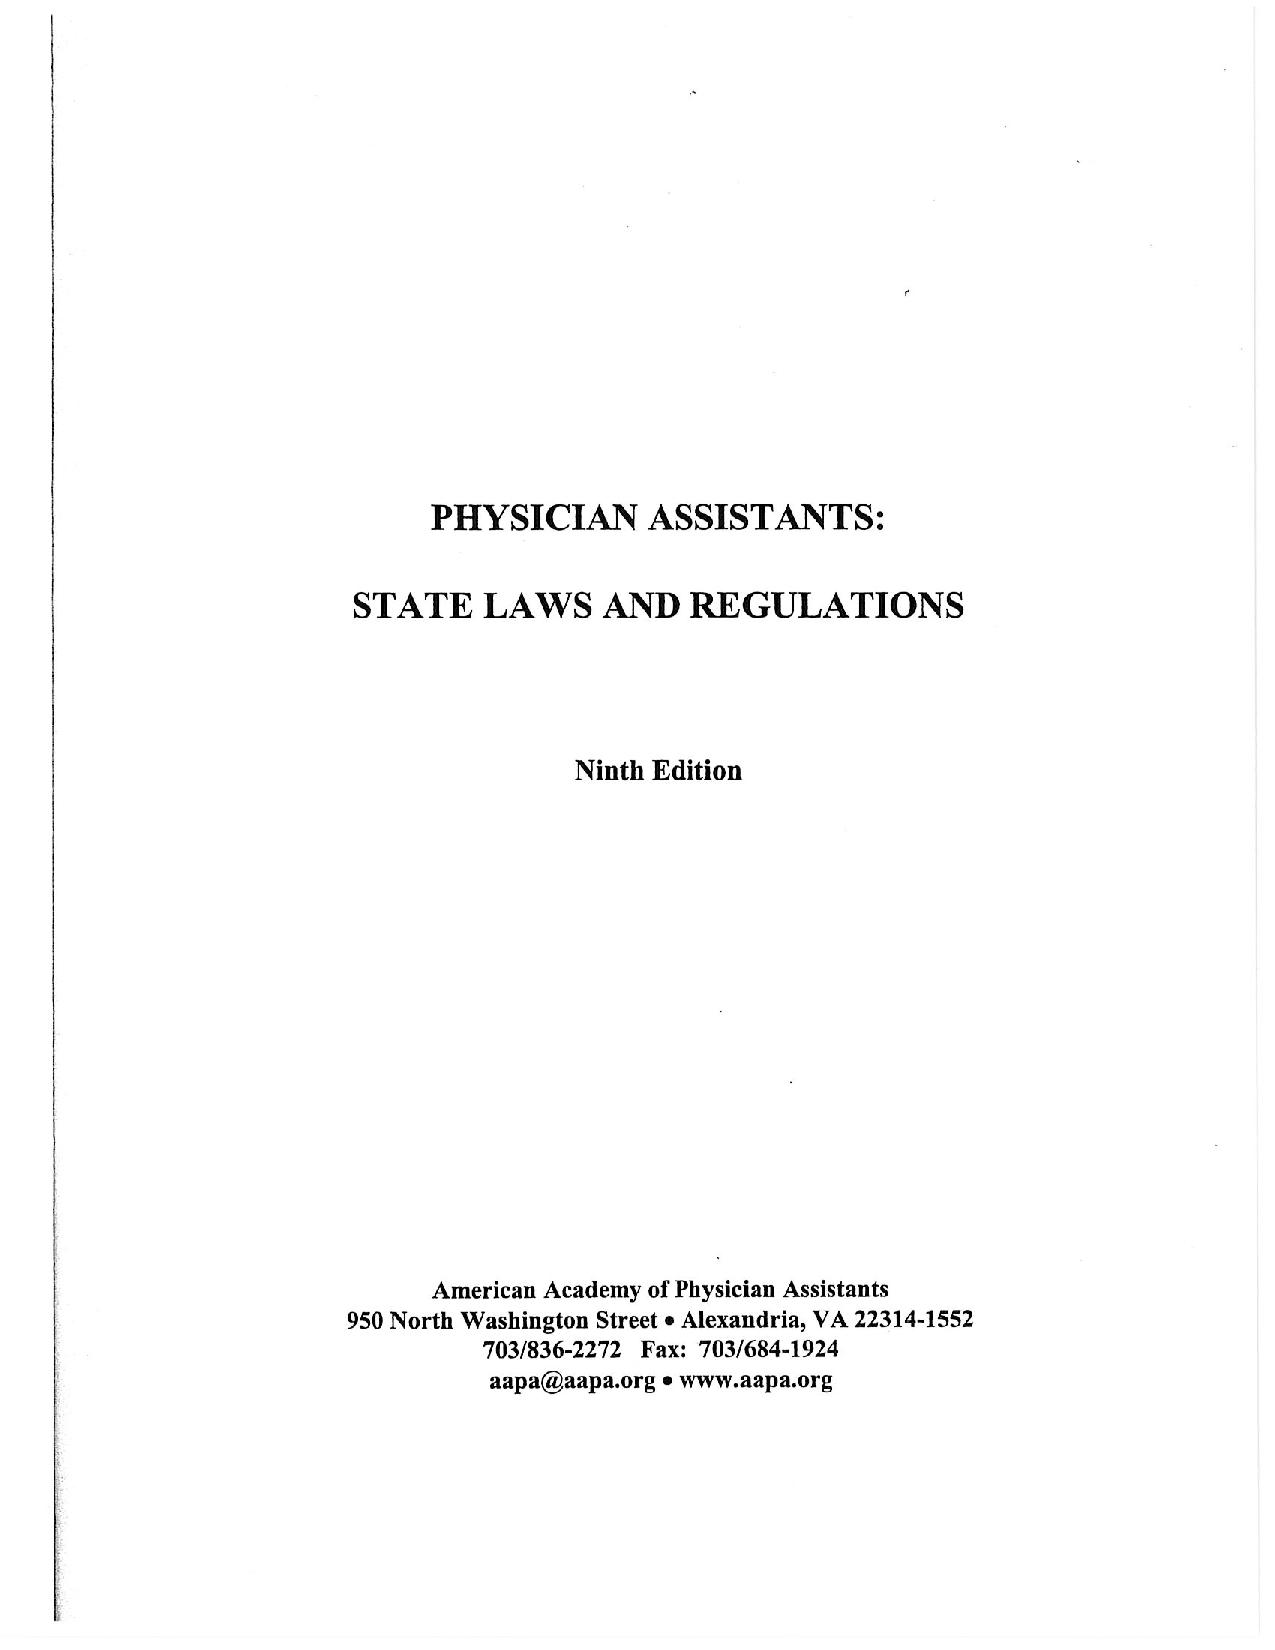 PA State Laws and Regulations 9th Edition